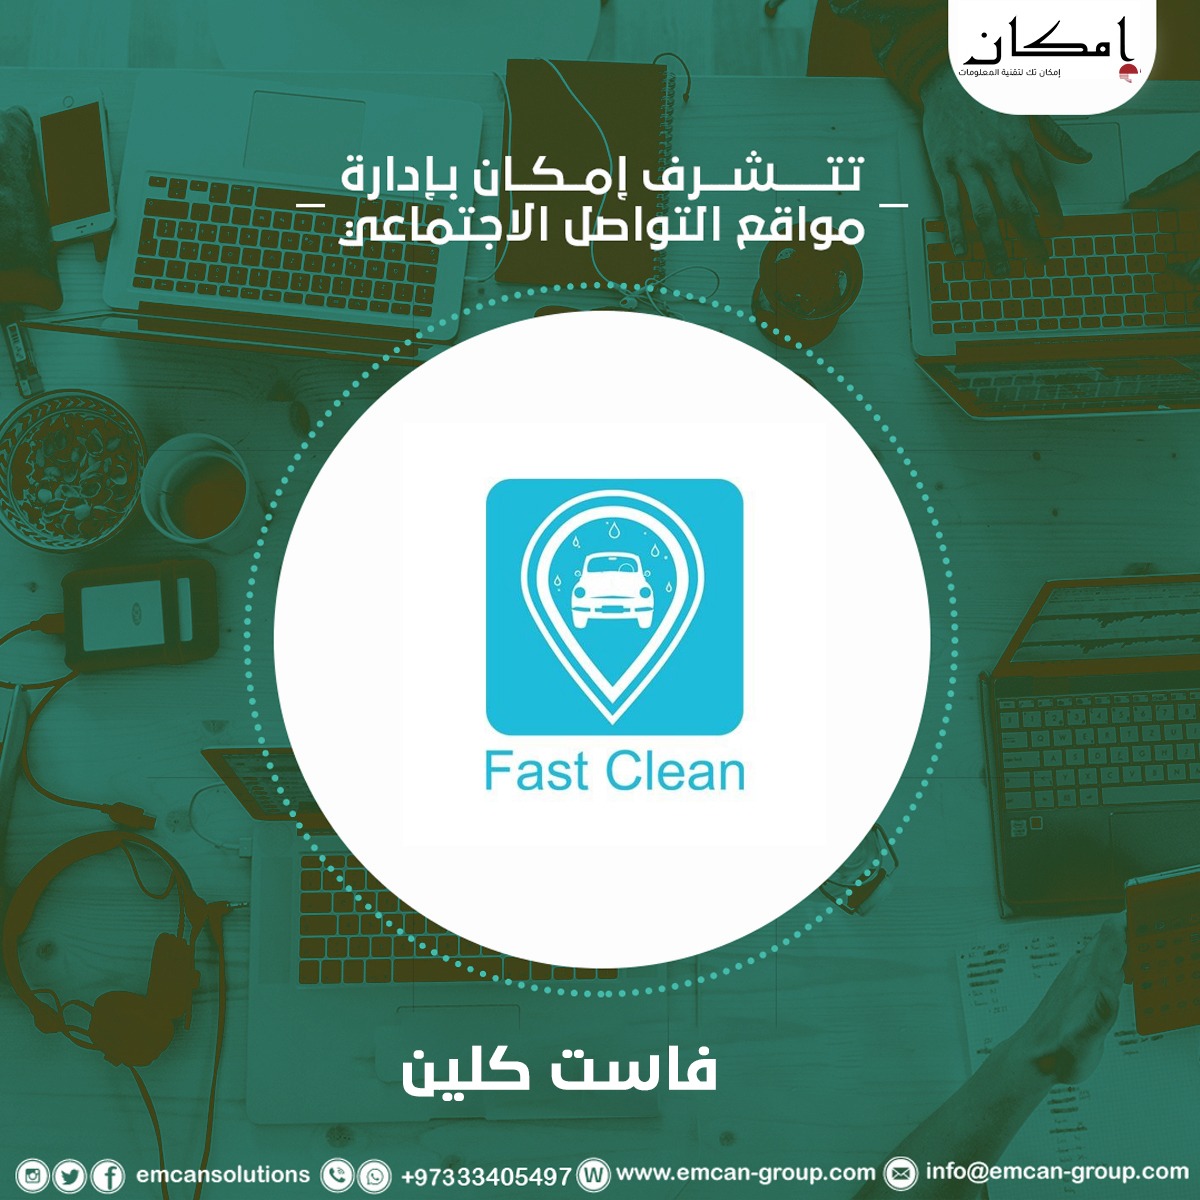 Social media management for the Fast Clean app